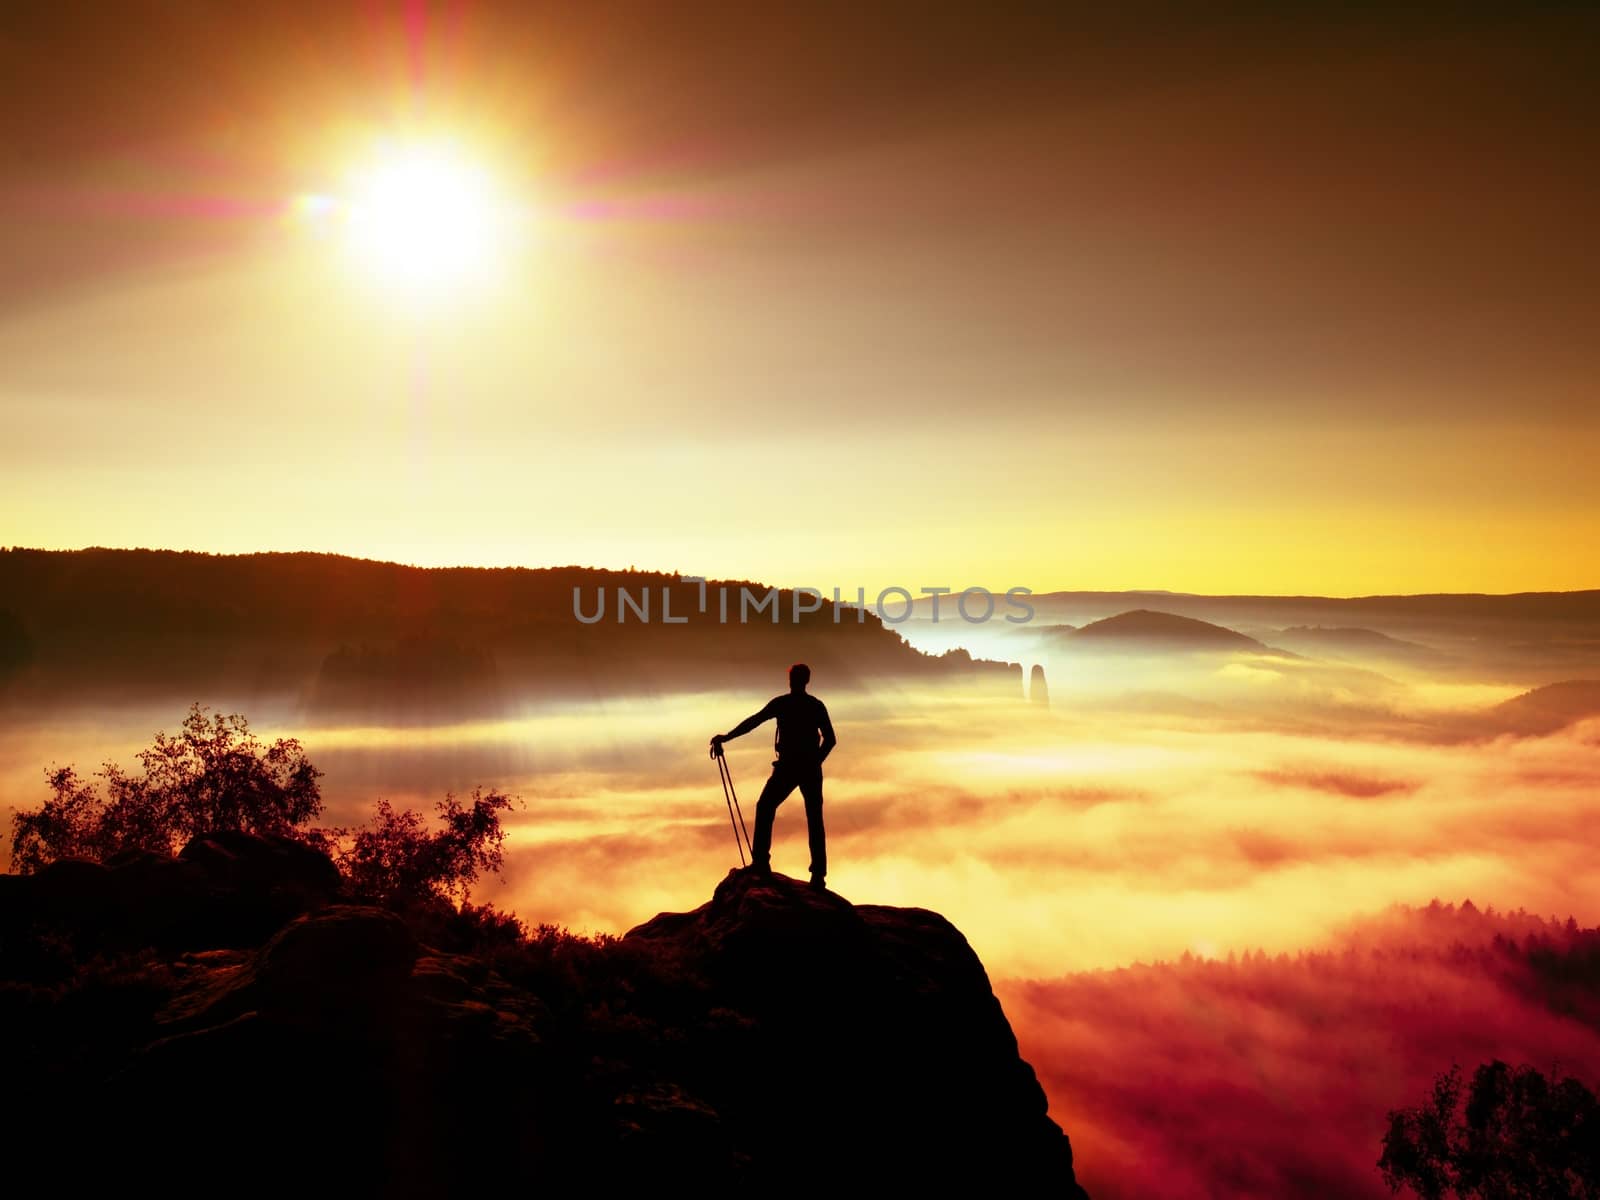 Tall backpacker with poles in hand. Sunny misty daybreak in rocky mountains. Hiker with backpack stand on rocky view point above valley. Vivid and strong vignetting effect.